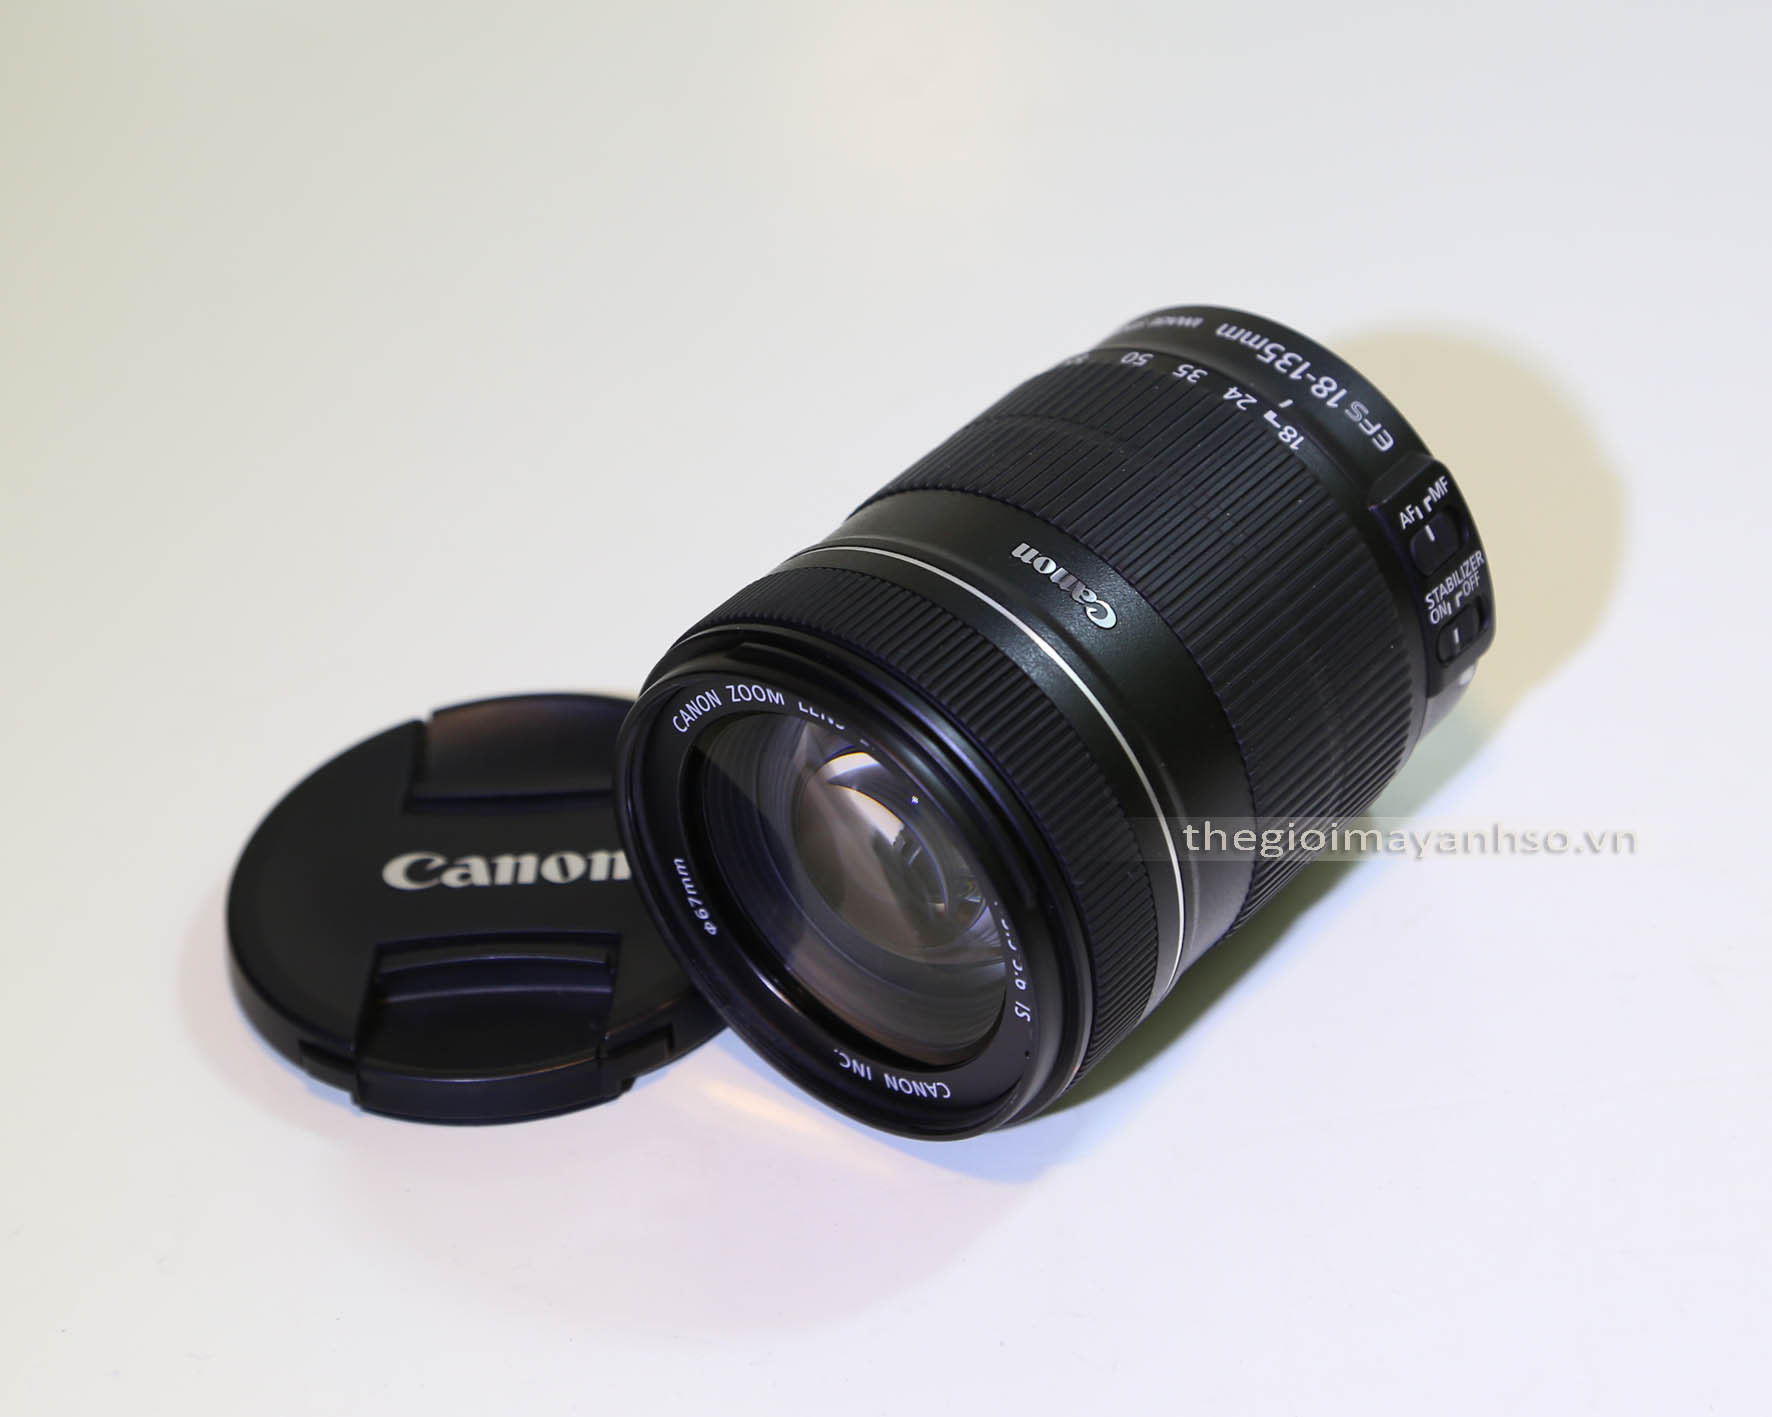 Canon EF-S 18-135mm f/3.5-5.6 IS